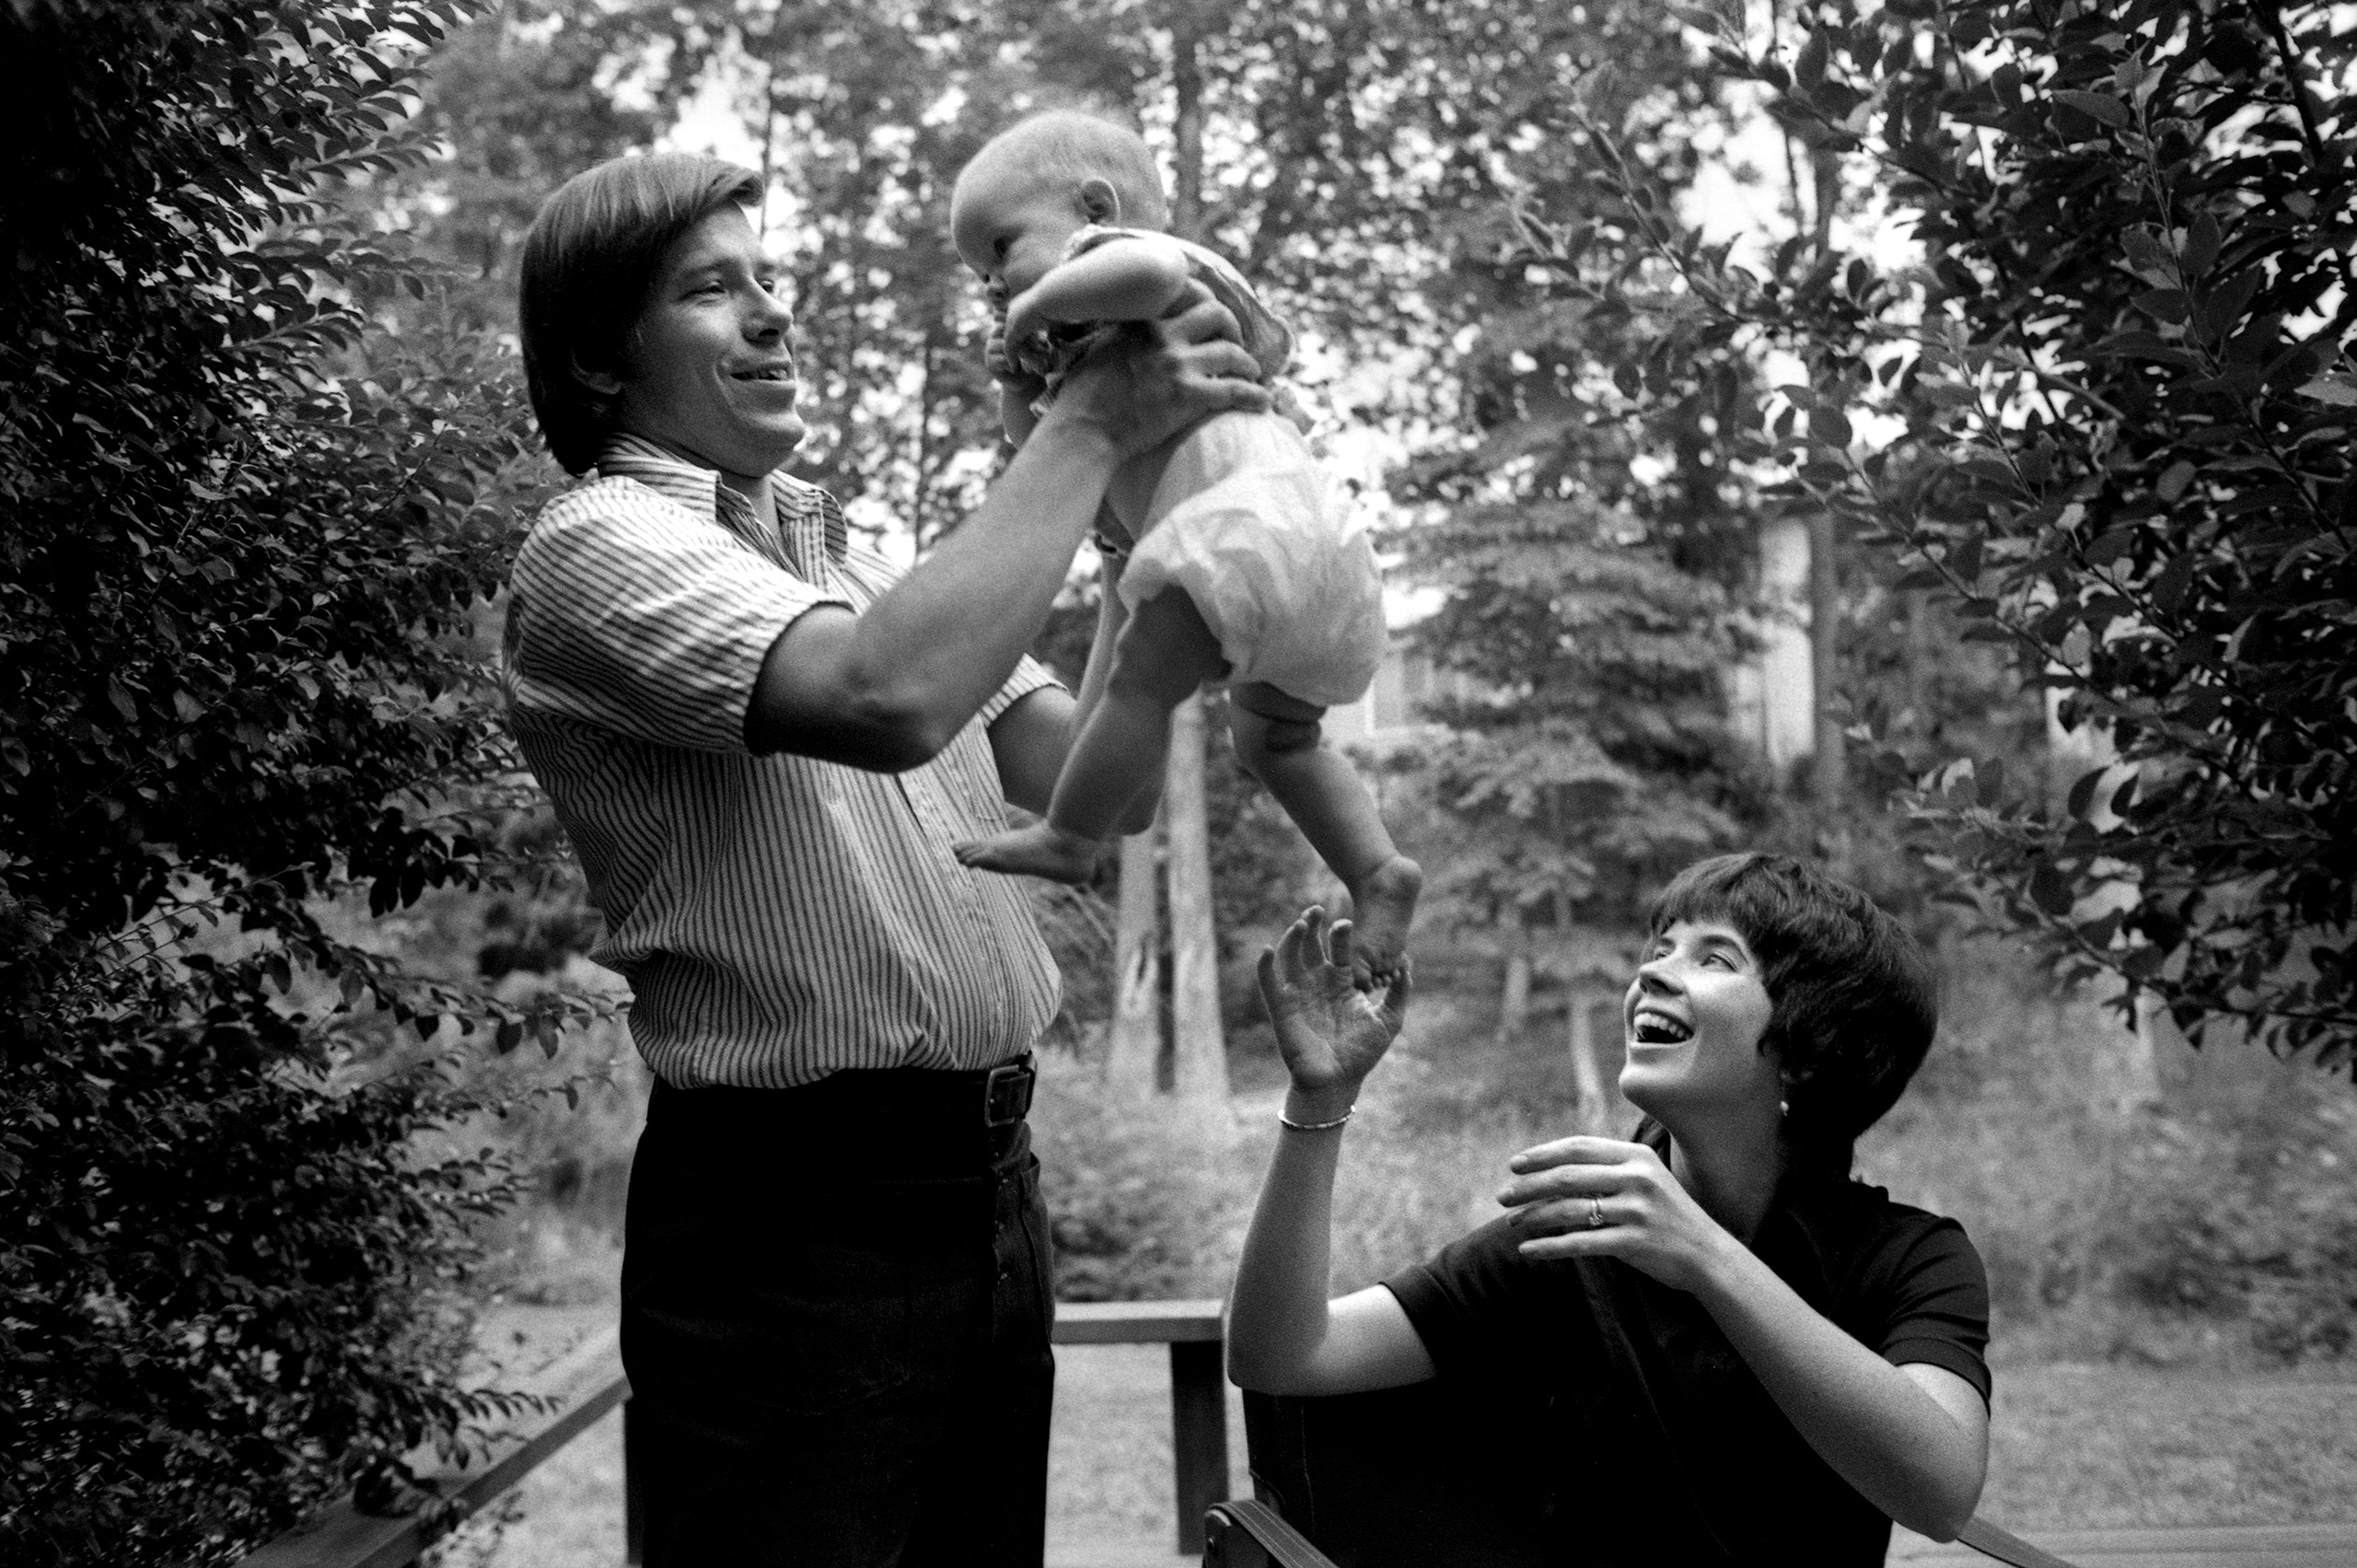 Ted and Sally Oldham of Reston, Virginia, play with their daughter Erin, 1971. Published in  The 50/50 Marriage: Is This What Women Want?  LOOK 35:19 (Oct. 5, 1971)